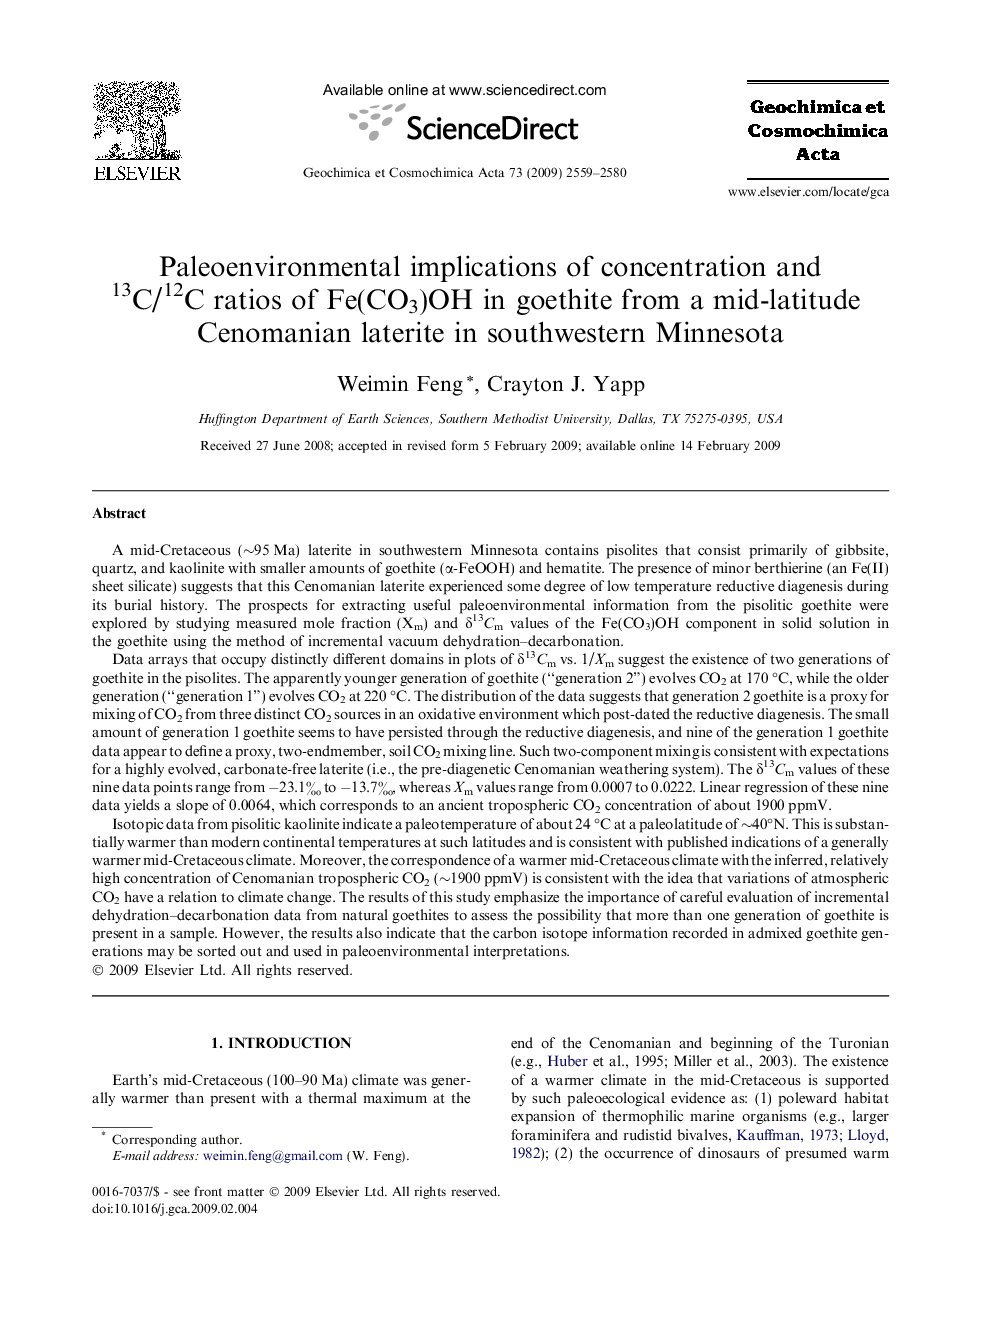 Paleoenvironmental implications of concentration and 13C/12C ratios of Fe(CO3)OH in goethite from a mid-latitude Cenomanian laterite in southwestern Minnesota